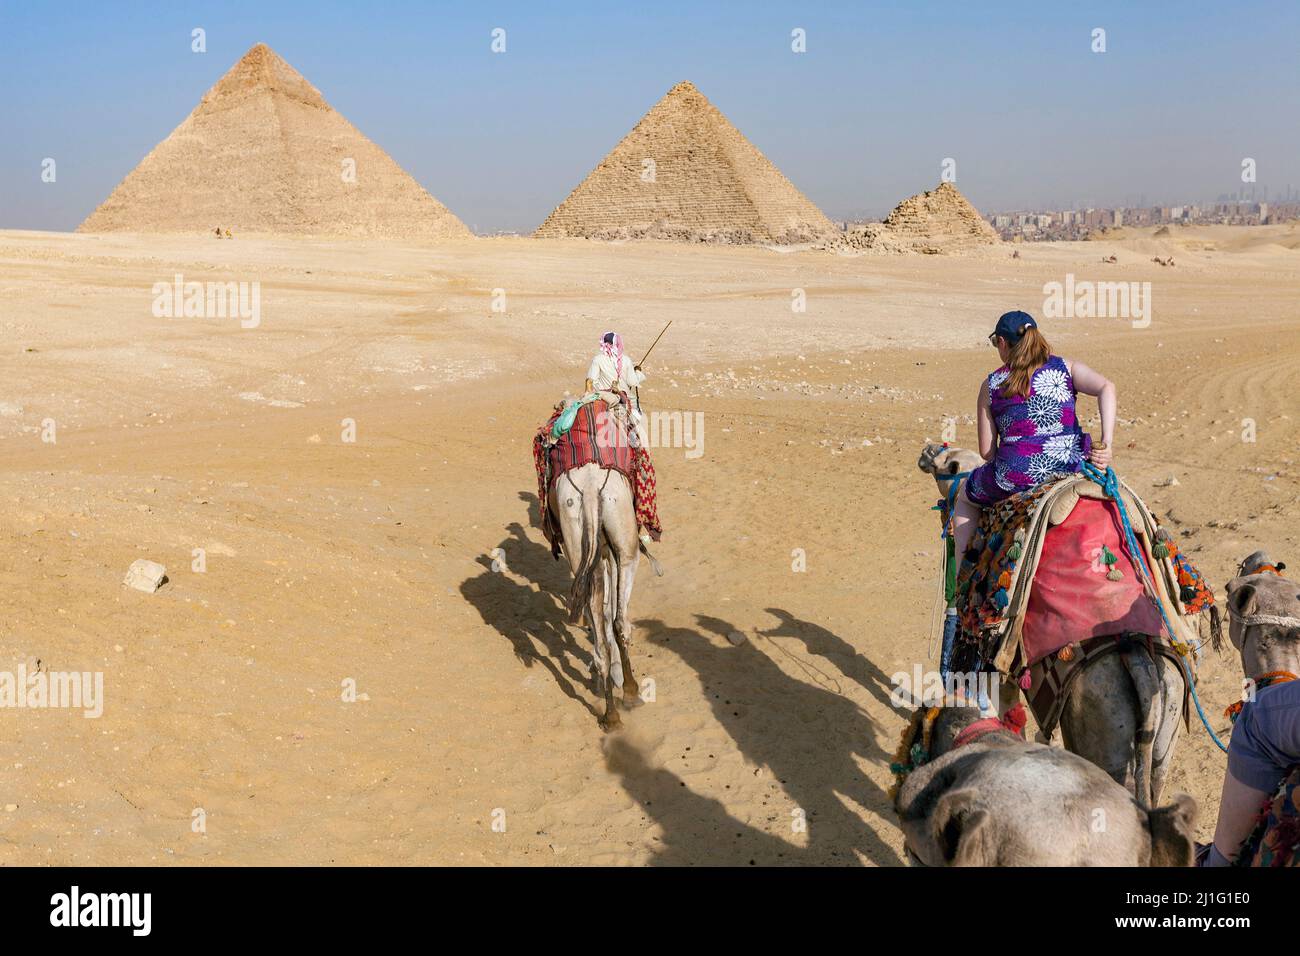 Tourists riding camels near the pyramids of Egypt Stock Photo